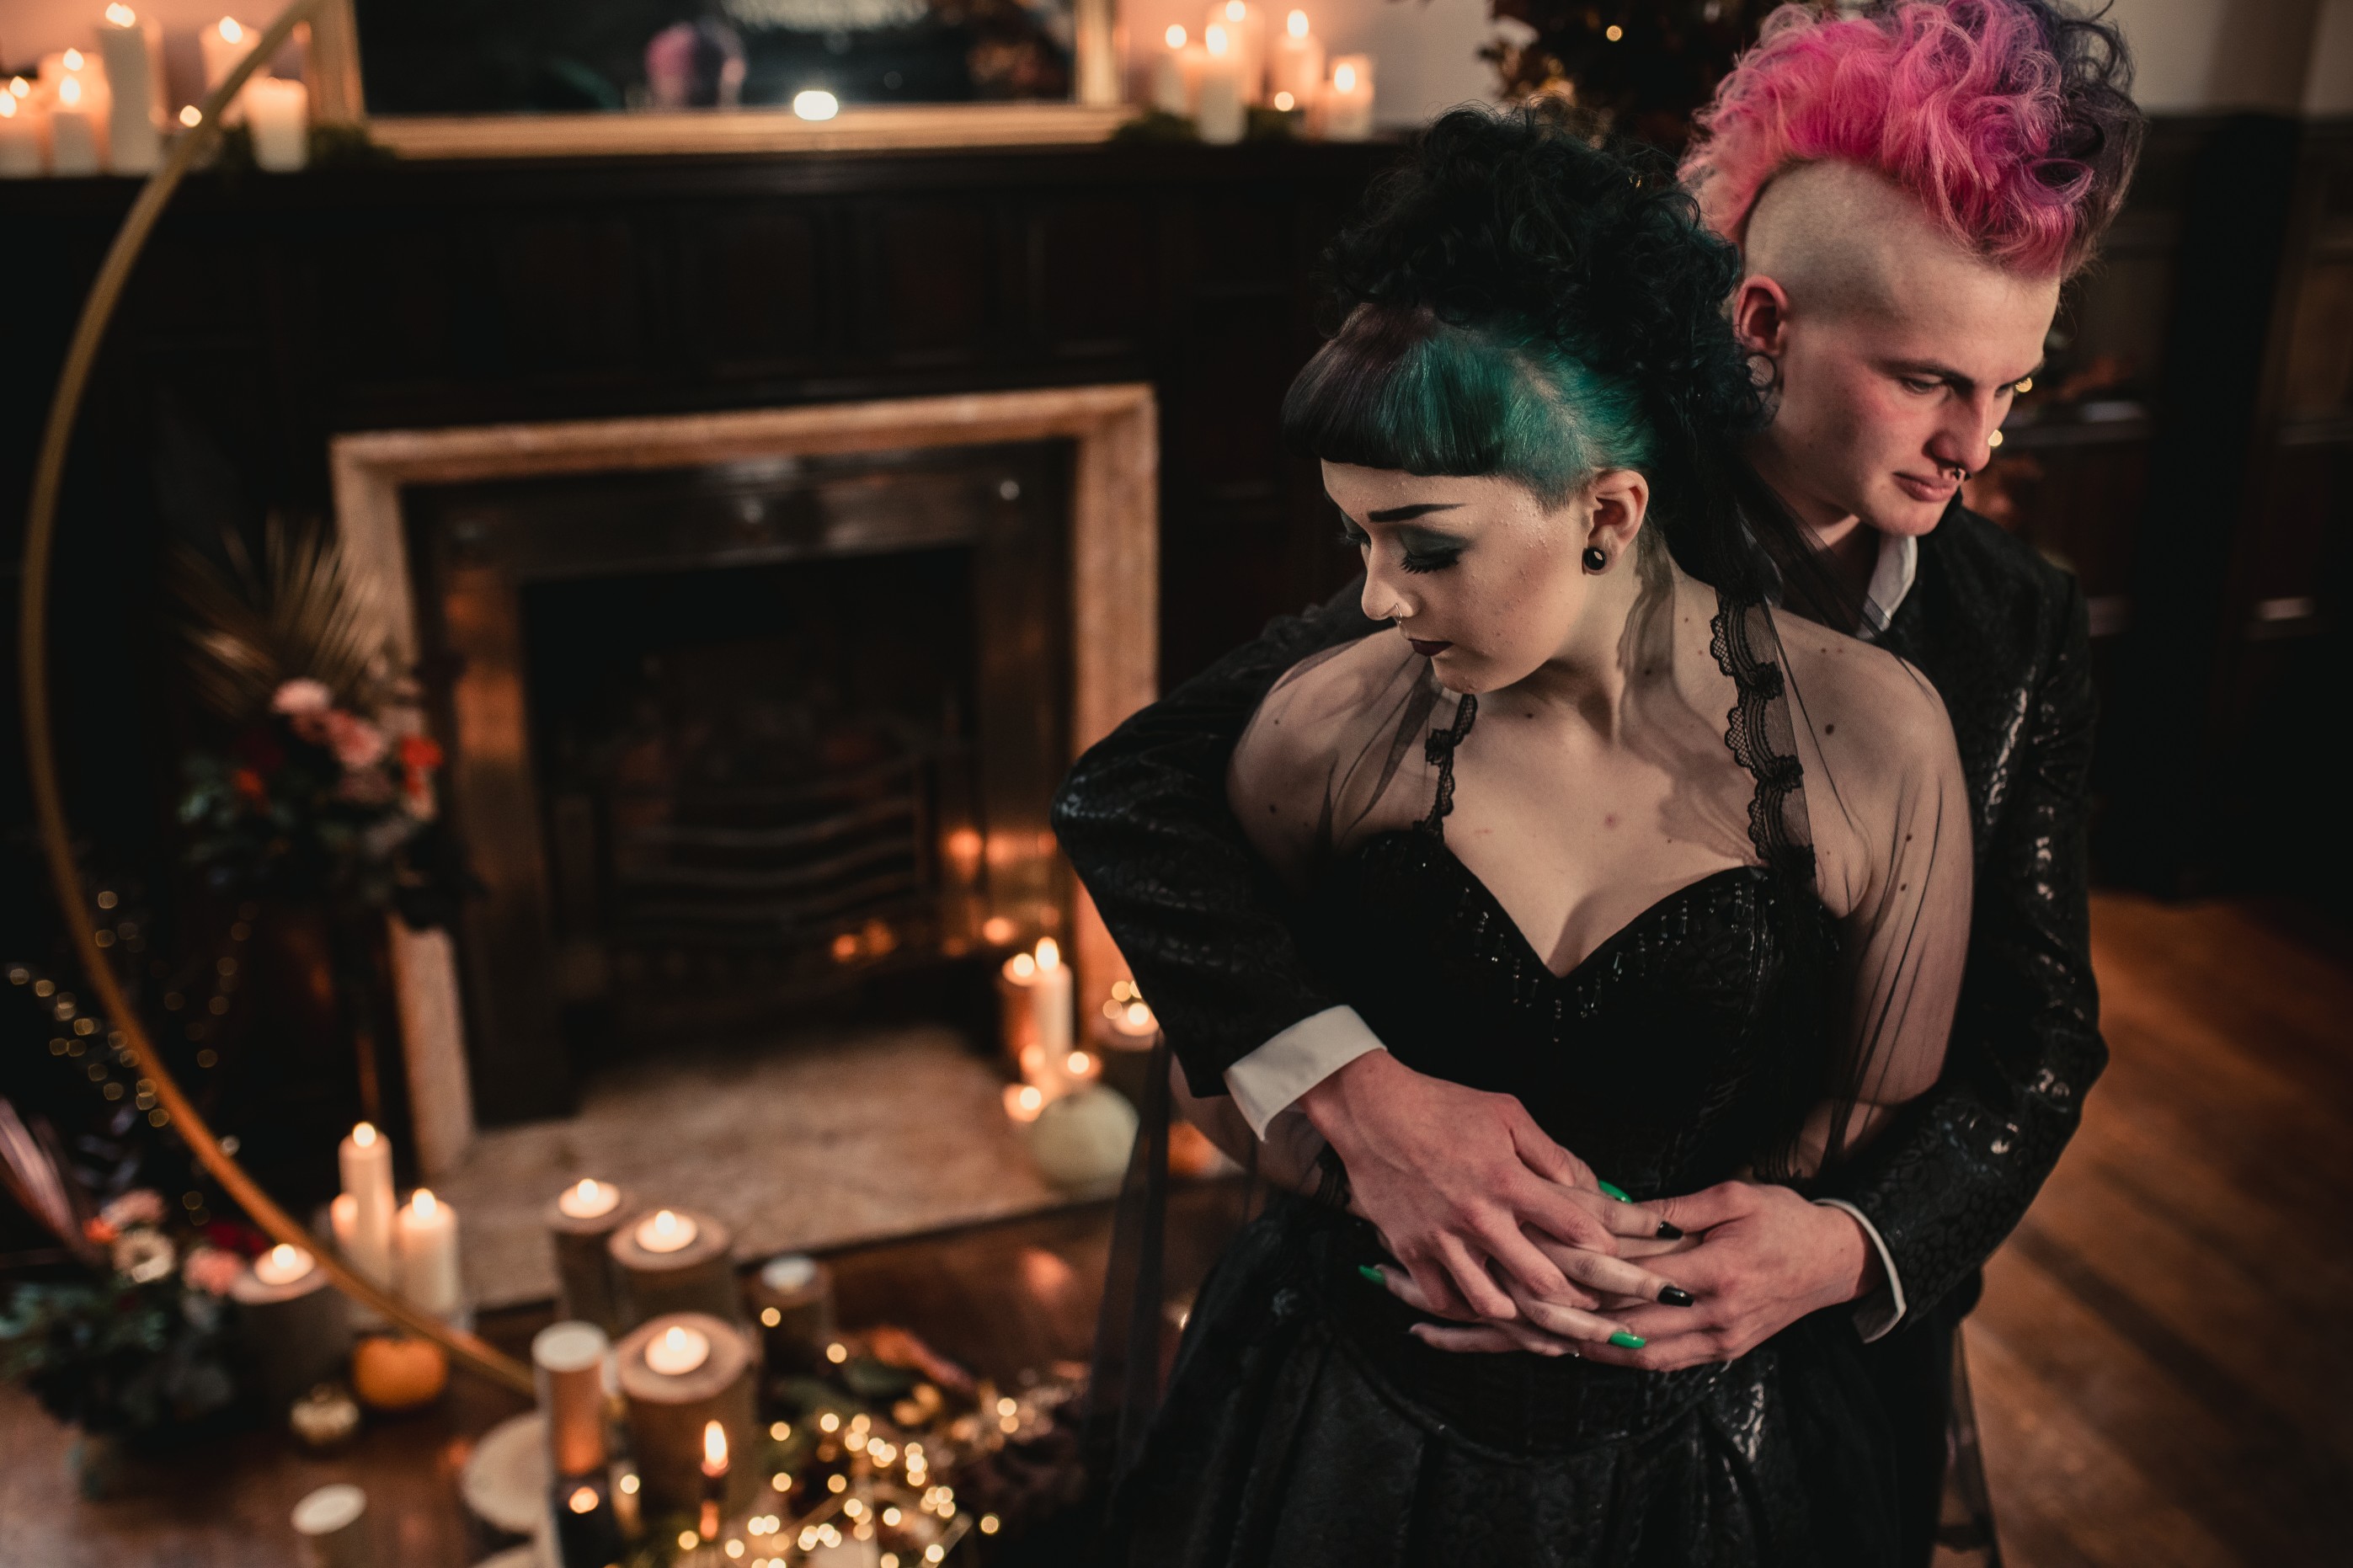 gothic halloween wedding ideas - contemporary wedding styling from the wedding alchemist in front of fireplace by candlelight